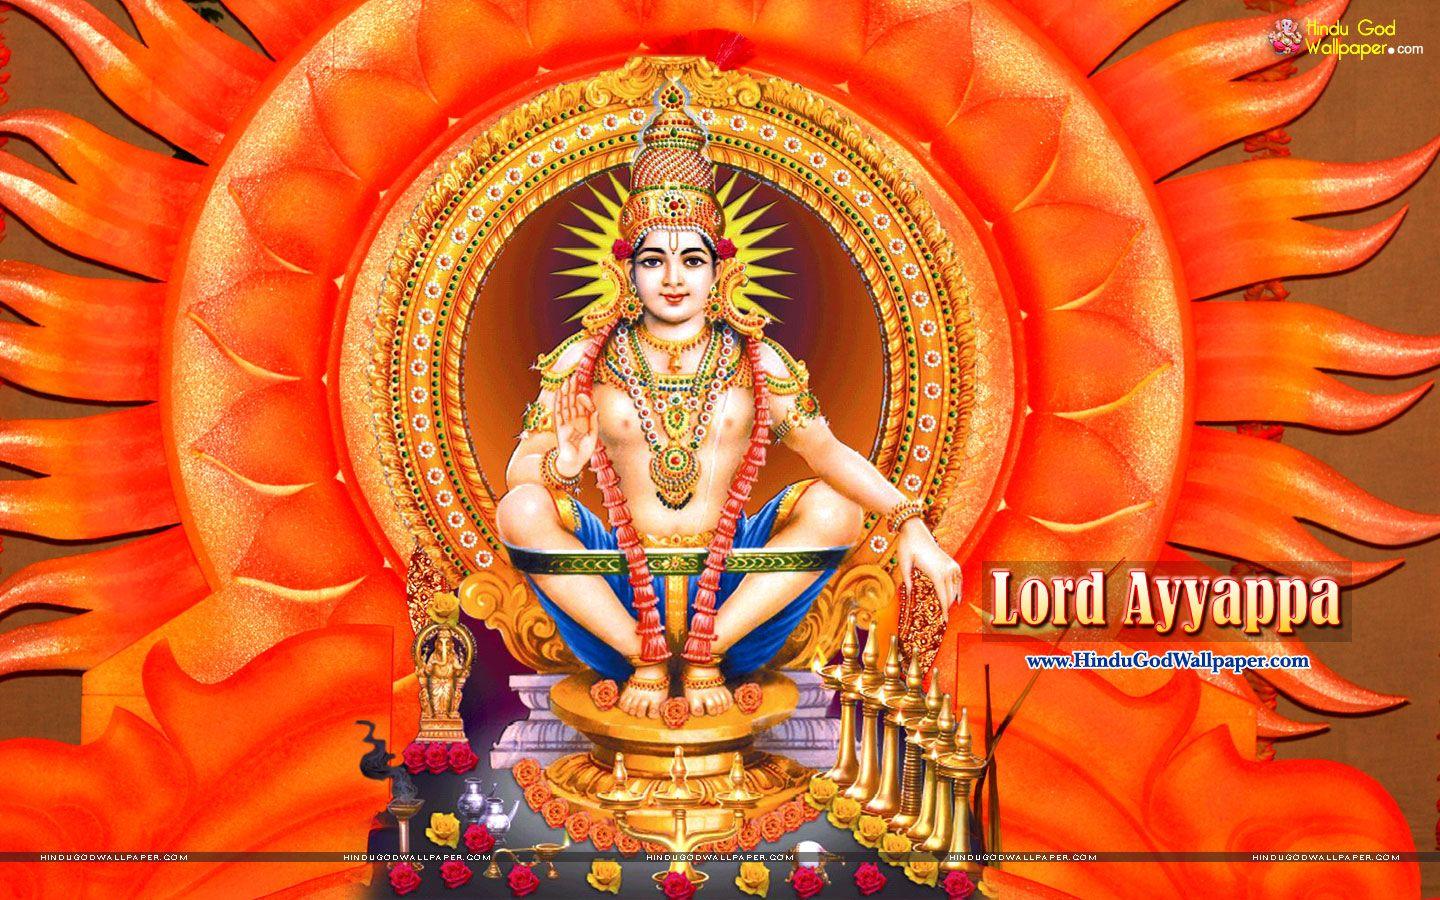 Ayyappa Live Wallpapers download for desktop with High